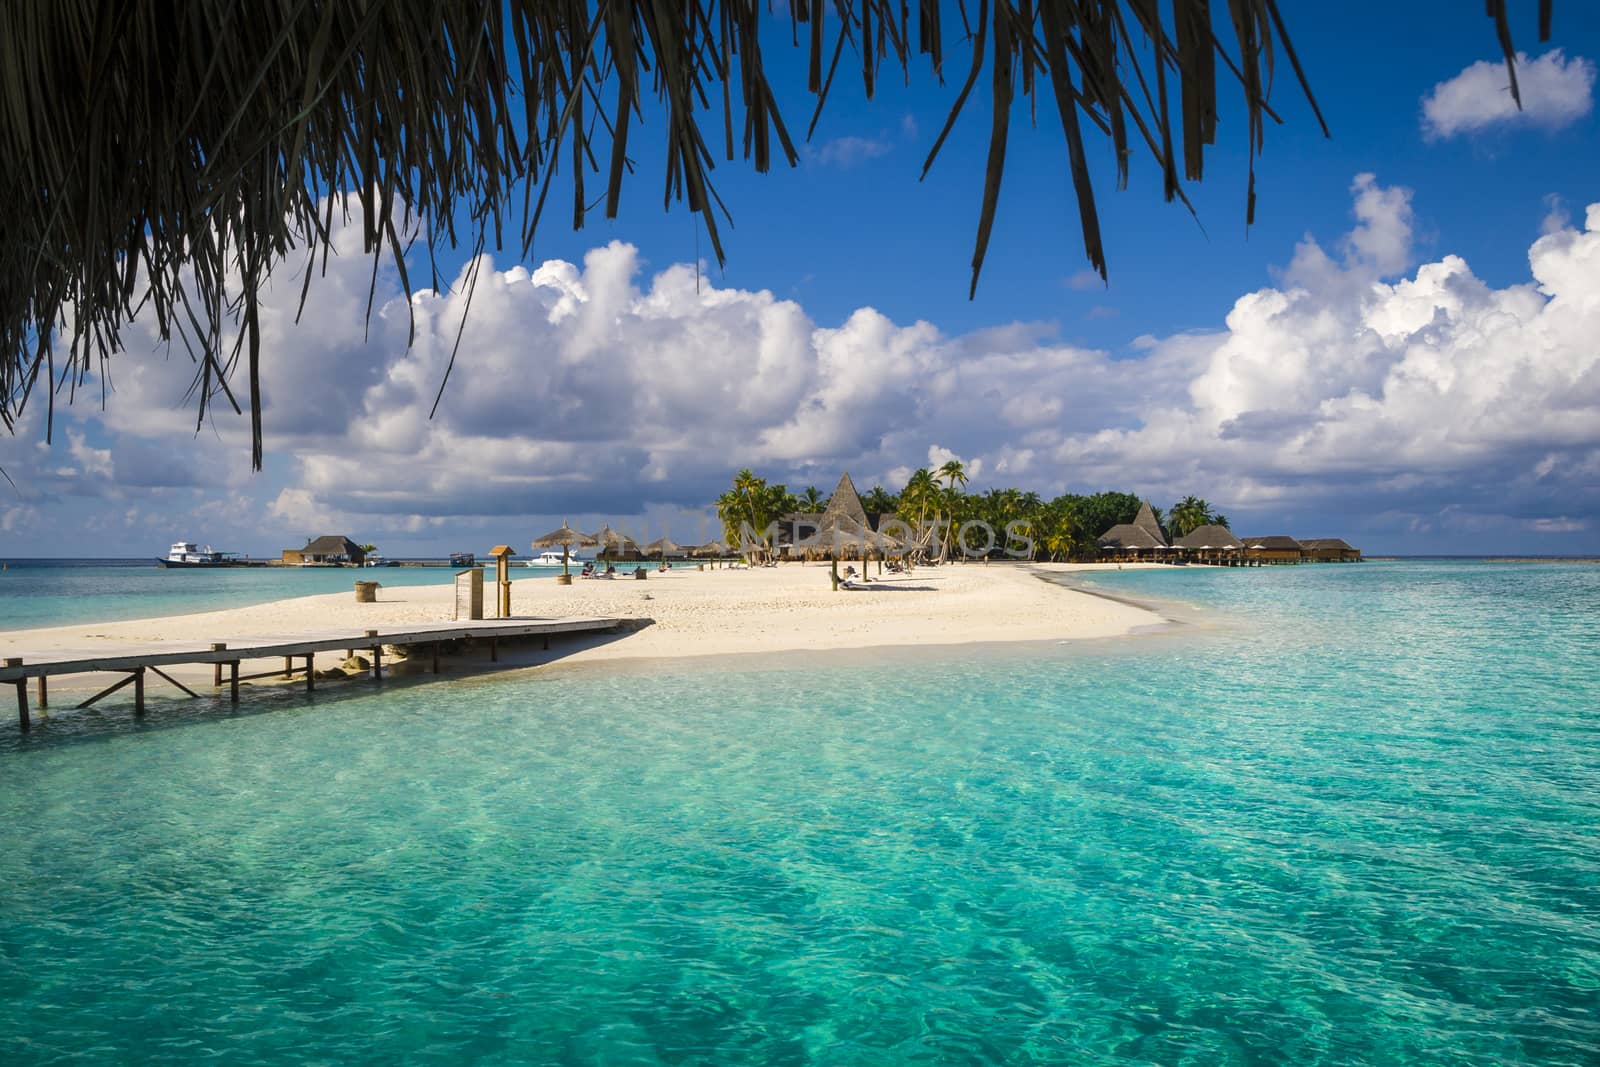 a Maldives tropical island and turquoise water. Suitable for an idea of vacations, Caribbean or tropical summer time.